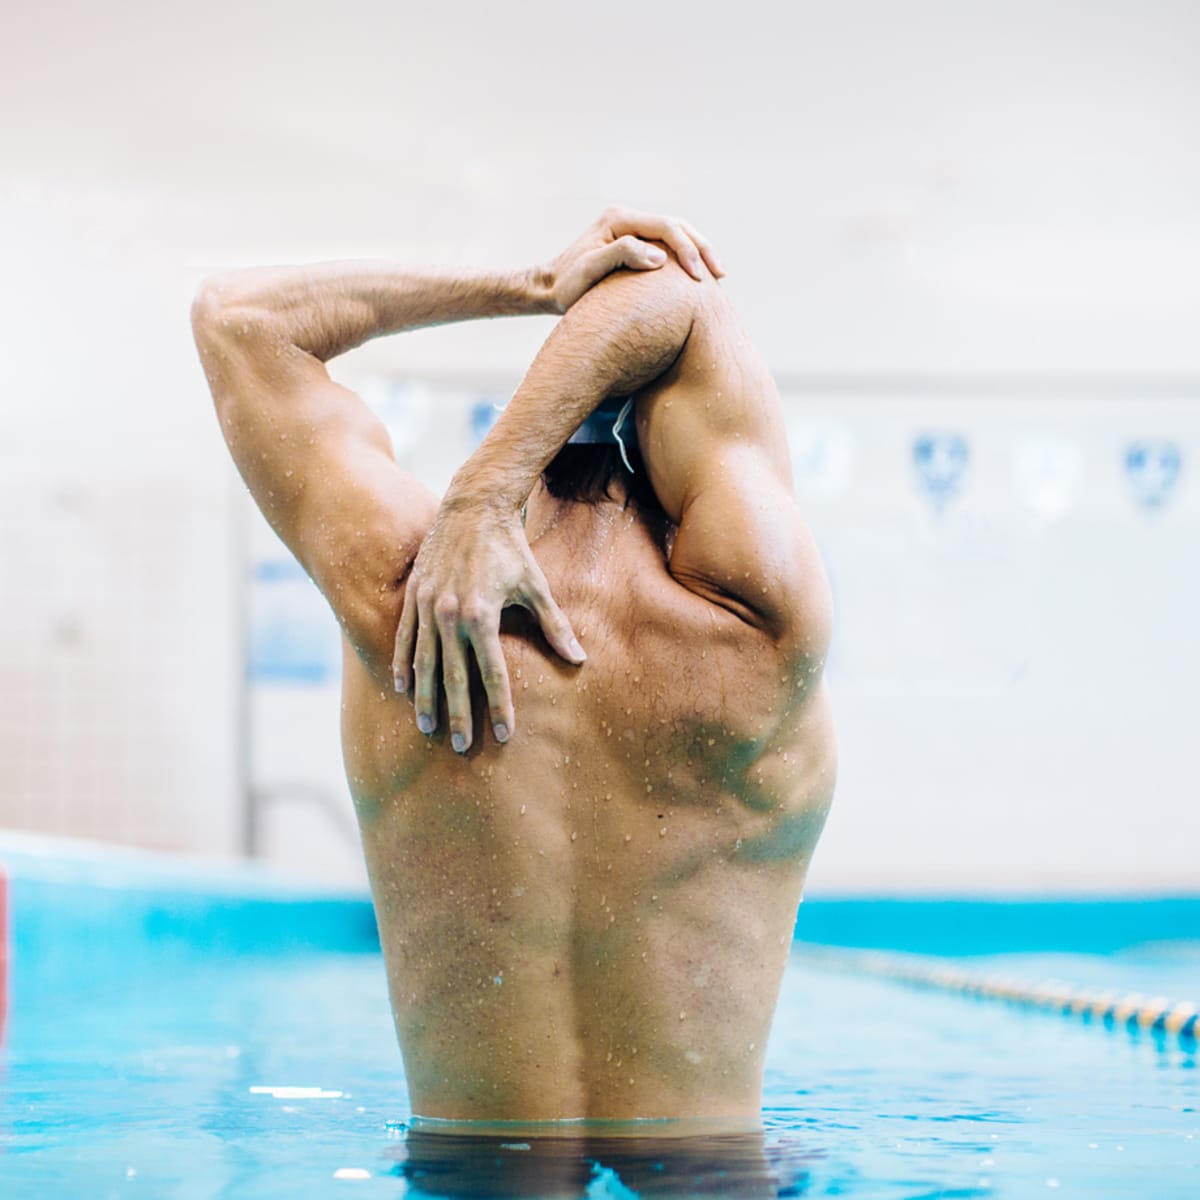 Swimming Workouts: The 5 Best Swimming Drills to Get Jacked - Men's Journal